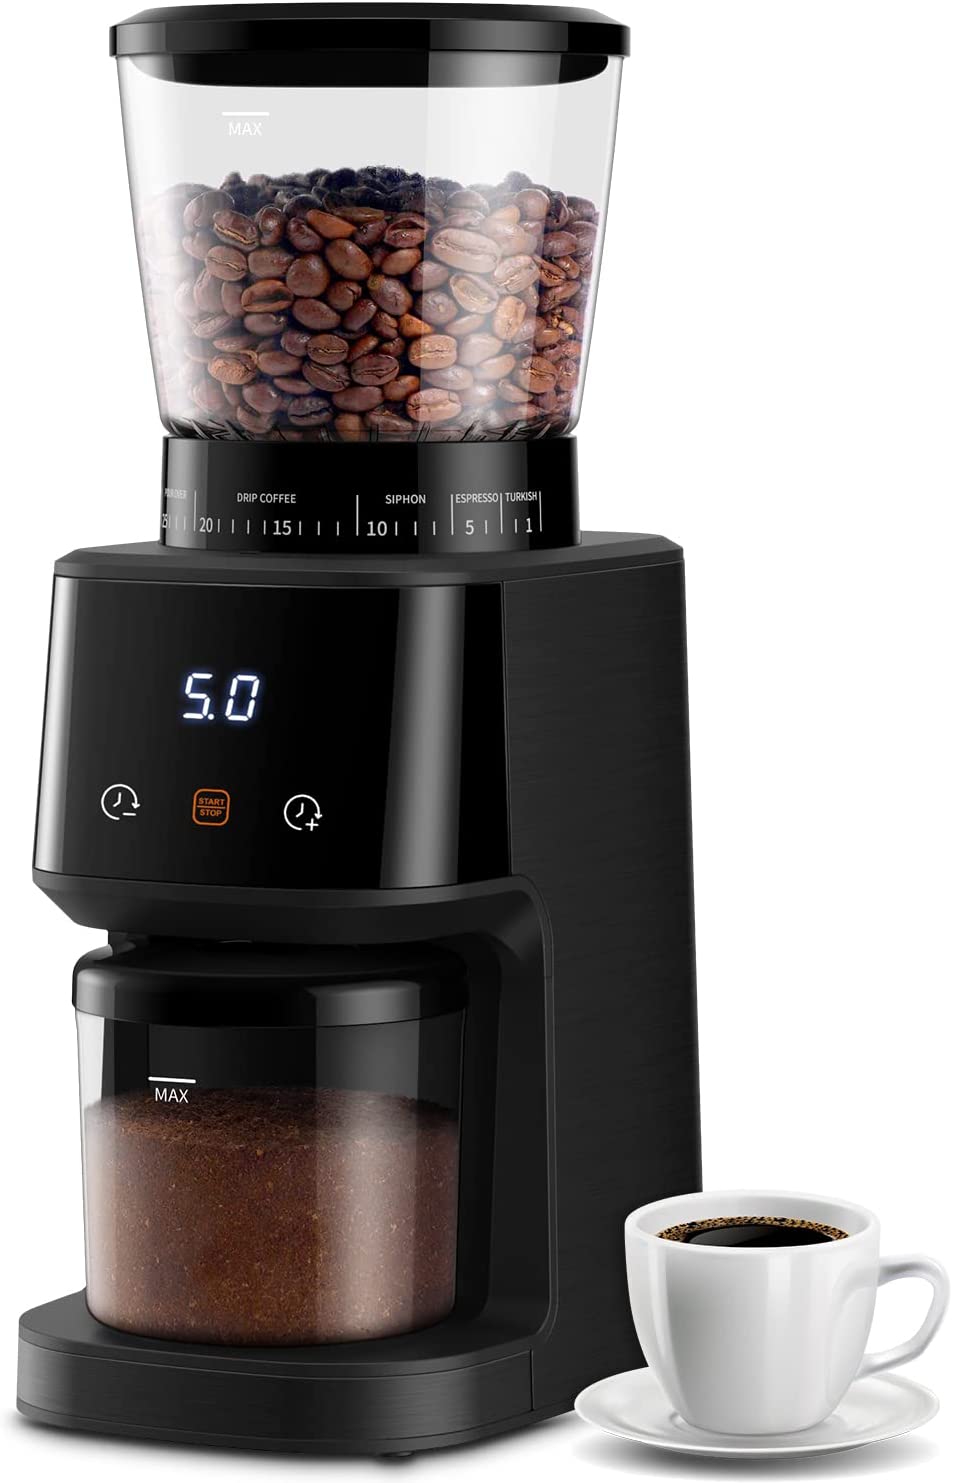 SHARDOR Electric Coffee Grinder Cone Grinder Stainless Steel 31 Fine Grinding Levels Coffee Grinder for Espresso Machines, LCD Screen and Precise Digital Timer, Black